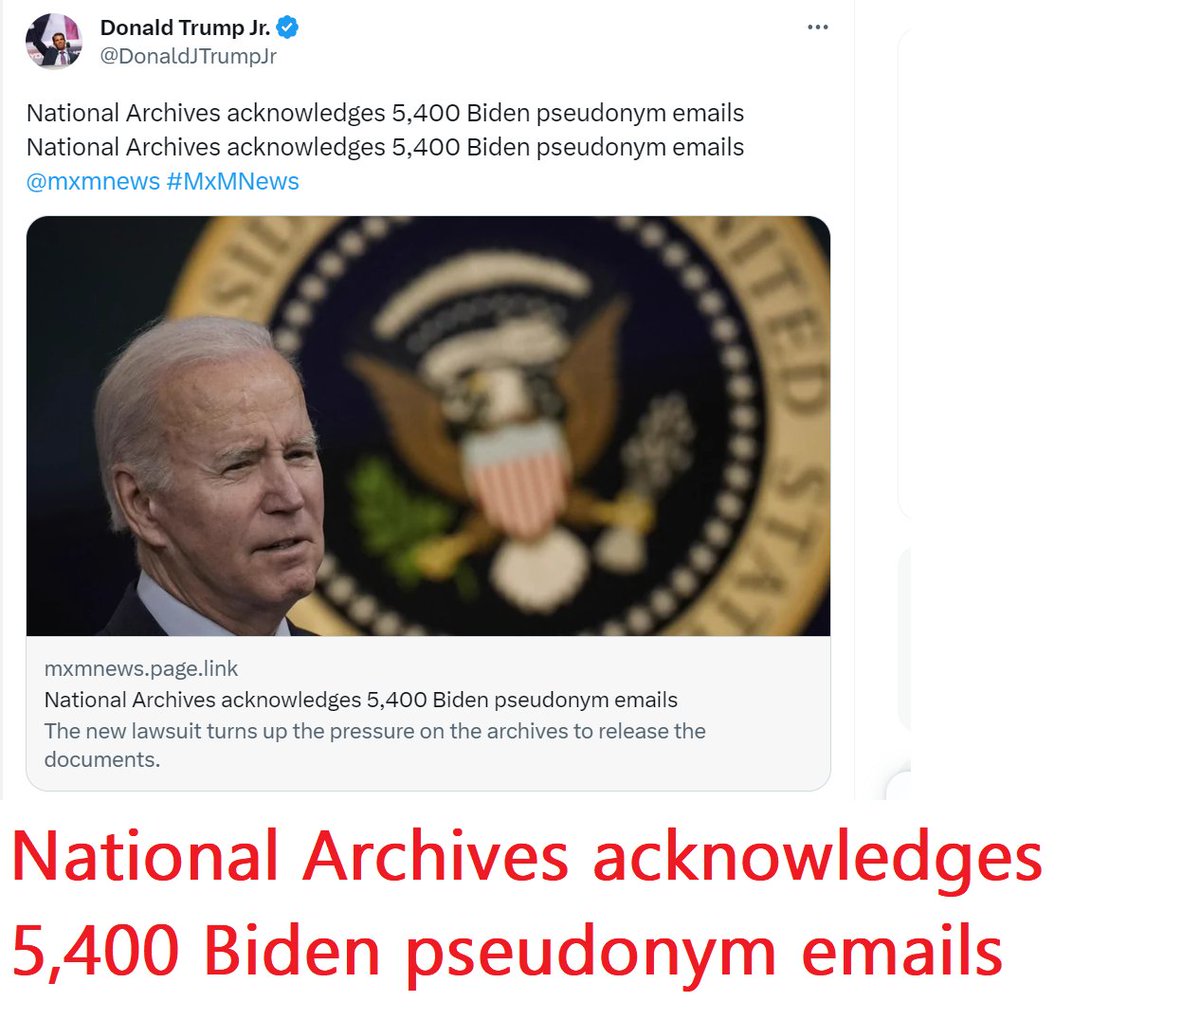 🇺🇸❤️PATRIOT FOLLOW TRAIN❤️🇺🇸 🇺🇸❤️HAPPY TUESDAY AFTERNOON❤️🇺🇸 🇺🇸❤️DROP YOUR HANDLES ❤️🇺🇸 🇺🇸❤️FOLLOW OTHER PATRIOTS❤️🇺🇸 🔥❤️LIKE & RETWEET IFBAP❤️🔥 🇺🇸❤️PRAY FOR TRUMP❤️🇺🇸 National Archives acknowledges 5,400 Biden pseudonym emails